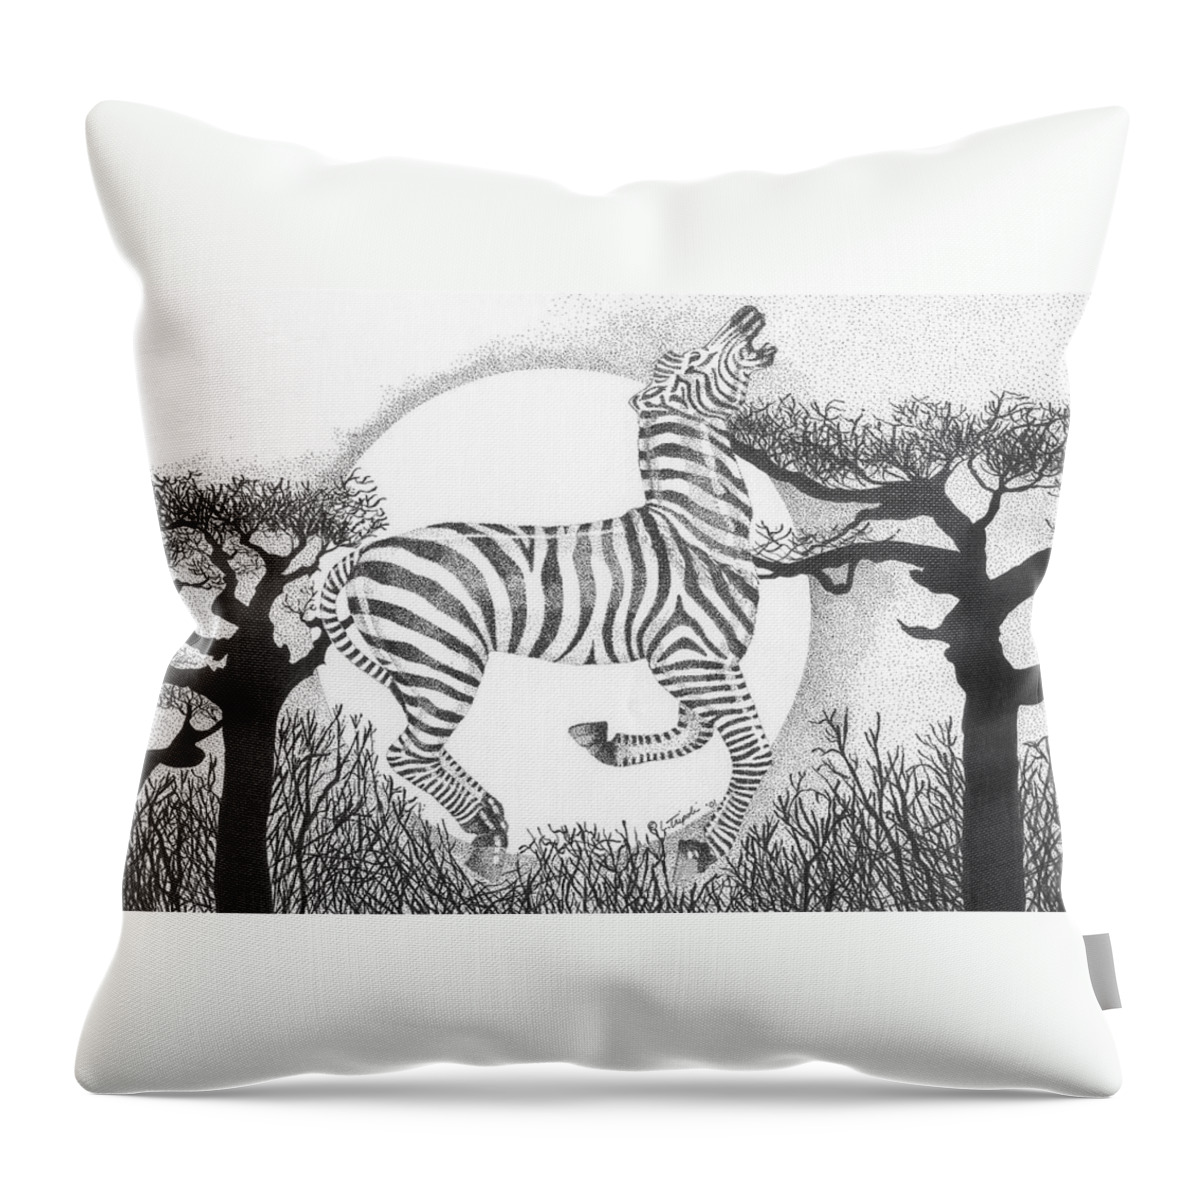 Zebra Throw Pillow featuring the drawing Serengeti Dreams by Lawrence Tripoli